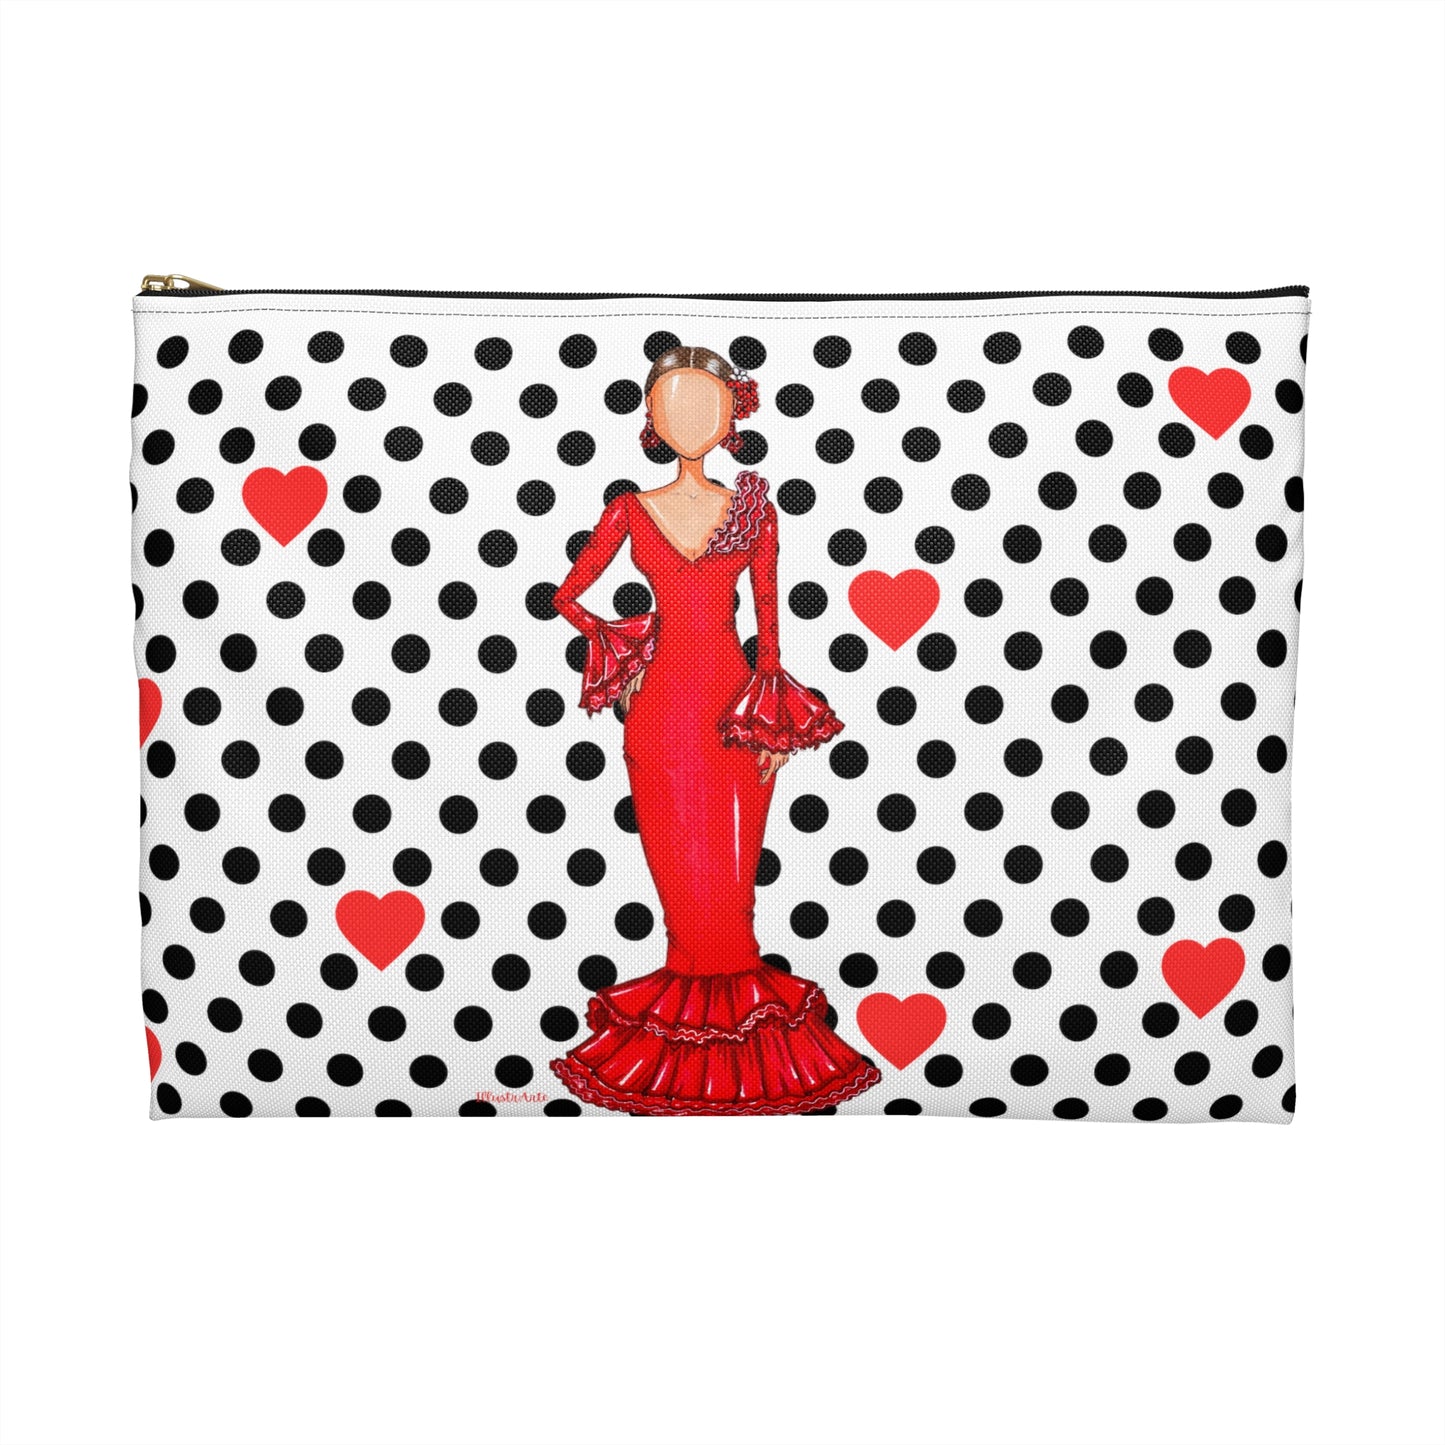 a polka dot purse with a woman in a red dress